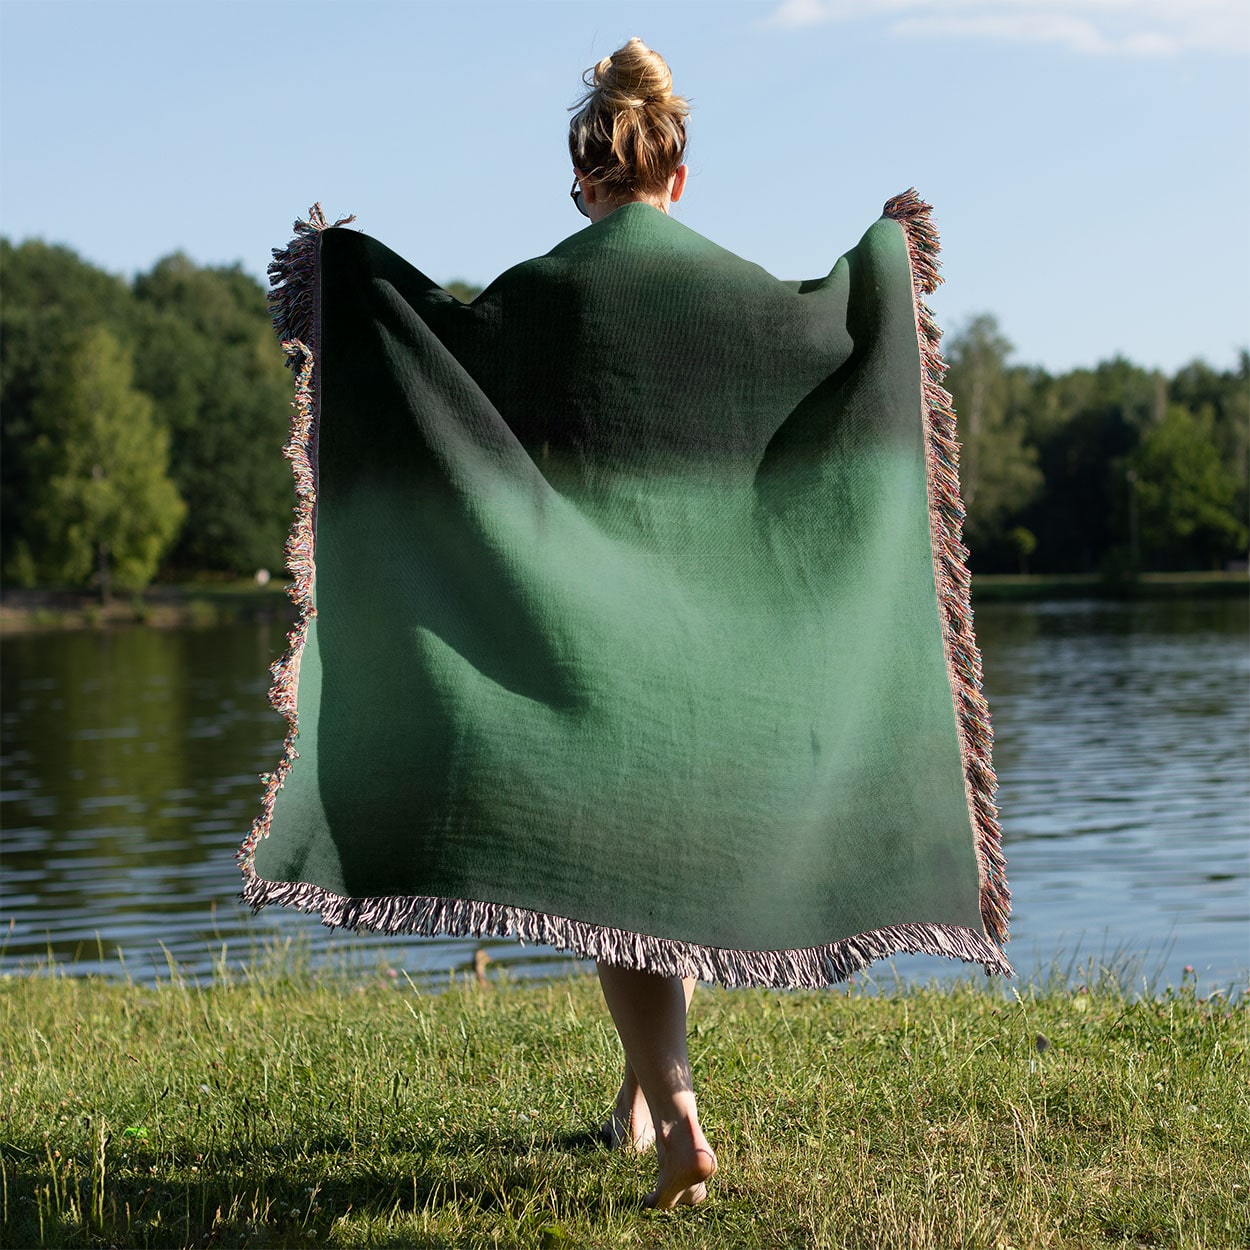 Black and Green Woven Blanket Held on a Woman's Back Outside